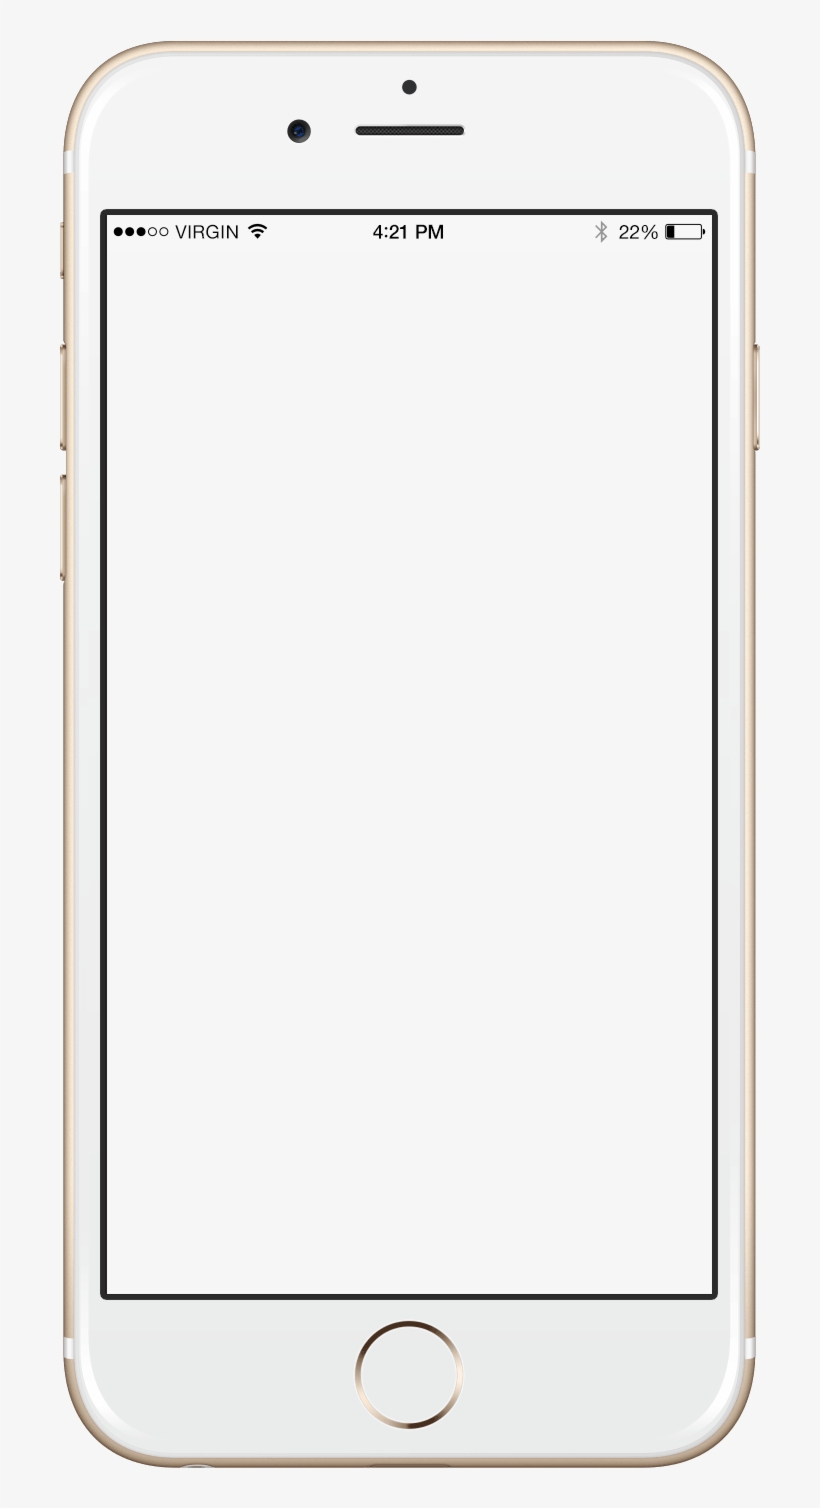 Iphone - Iphone 5s Wikipedia, transparent png #9180121